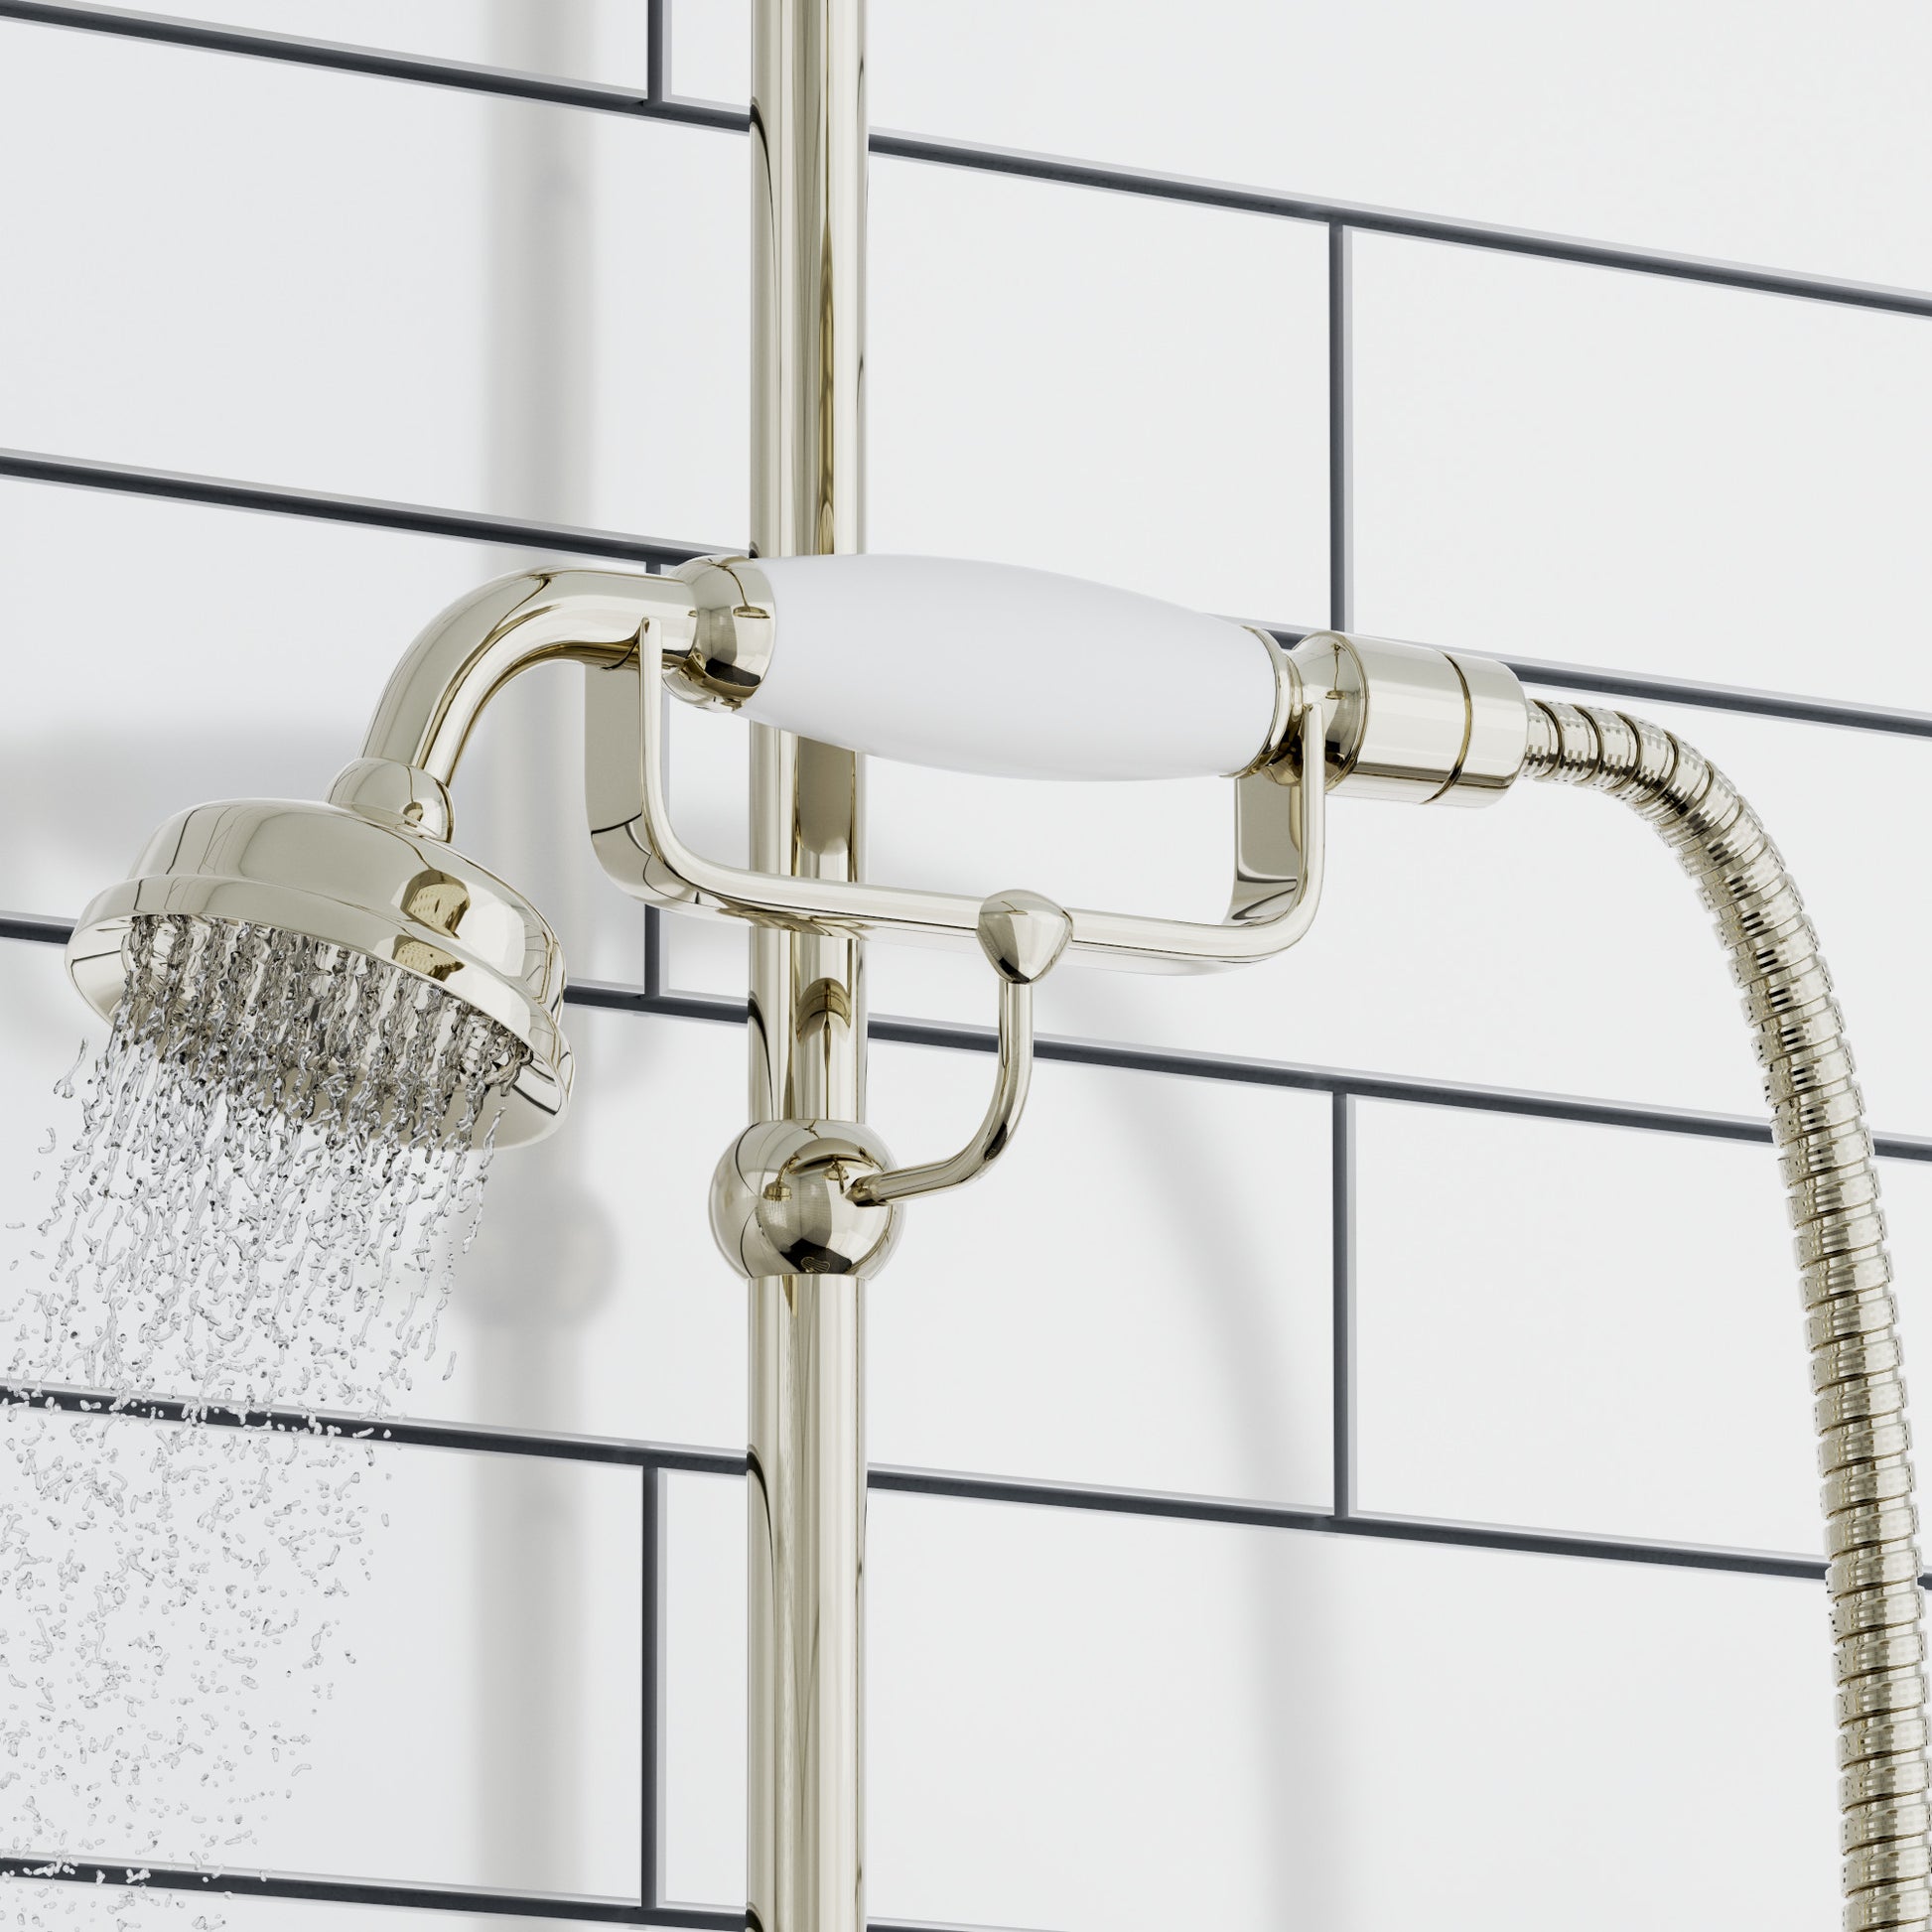 Telephone style rigid riser bracket for shower heads solid brass - gold - Showers